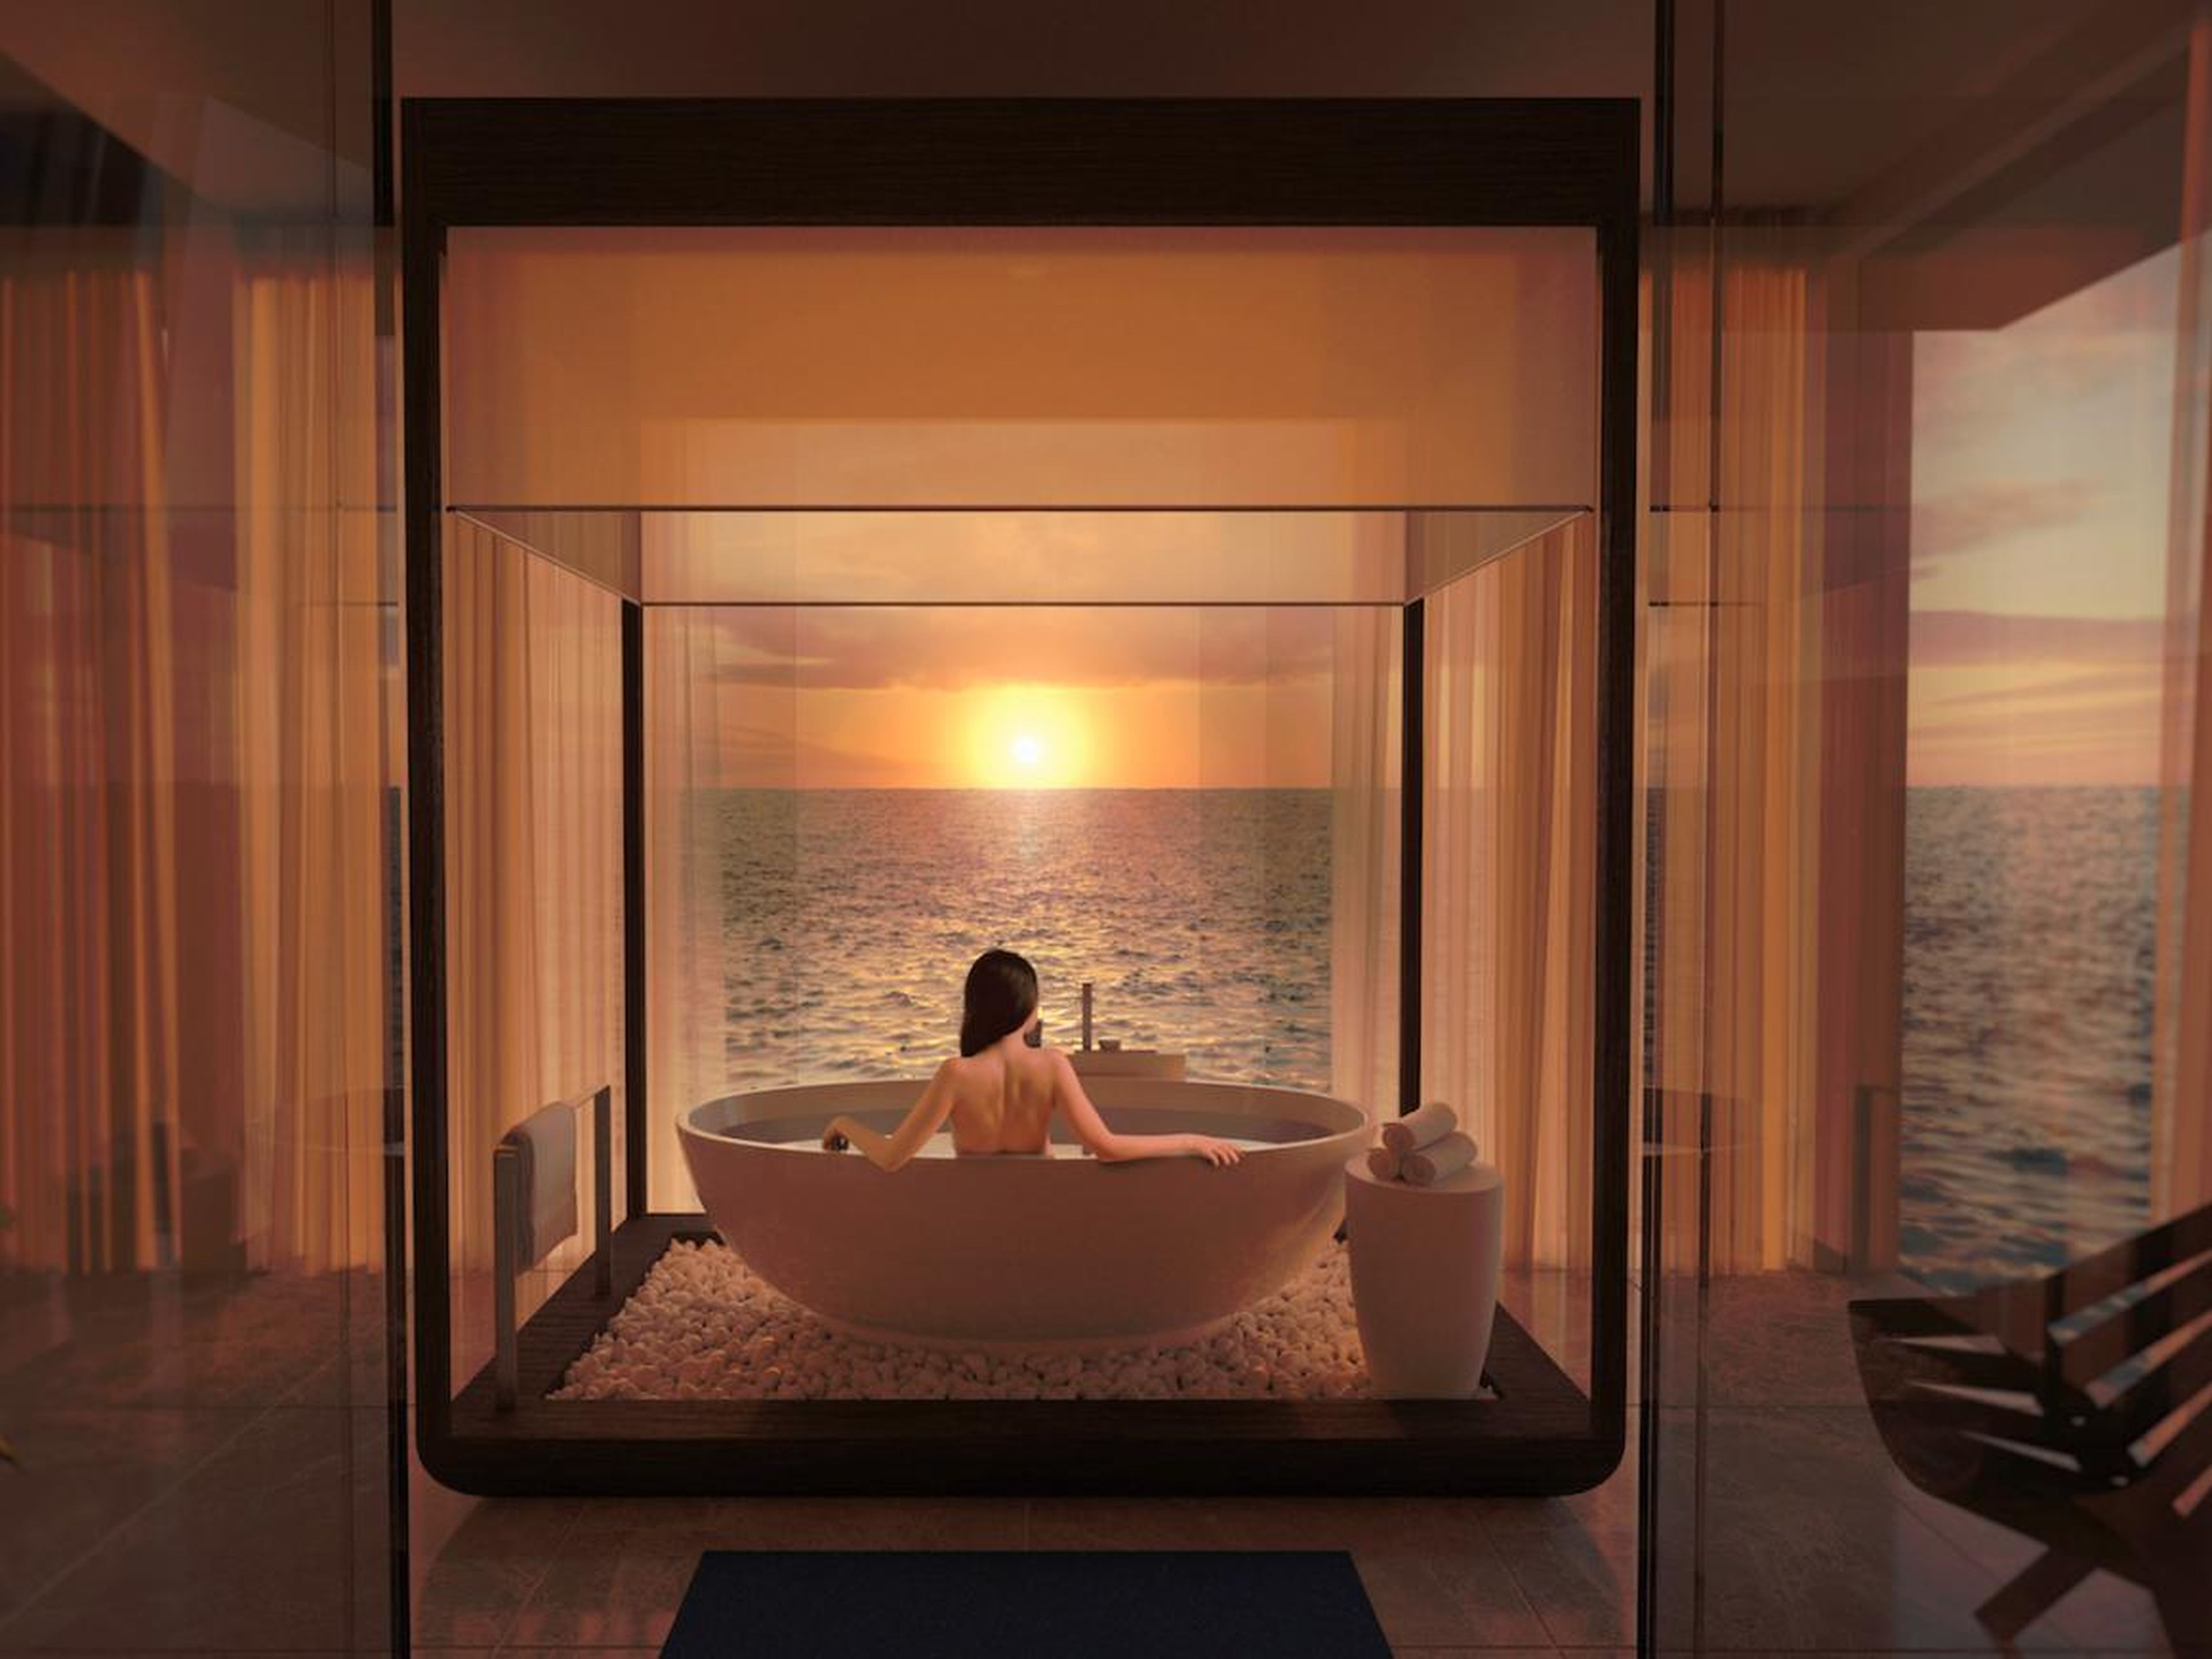 In addition to two bedrooms, the upper level has a bathroom with tub facing the ocean. But that's just one of many all-inclusive indulgences. There's a butler and chef for each suite, an on-call fitness trainer and spa treatments,